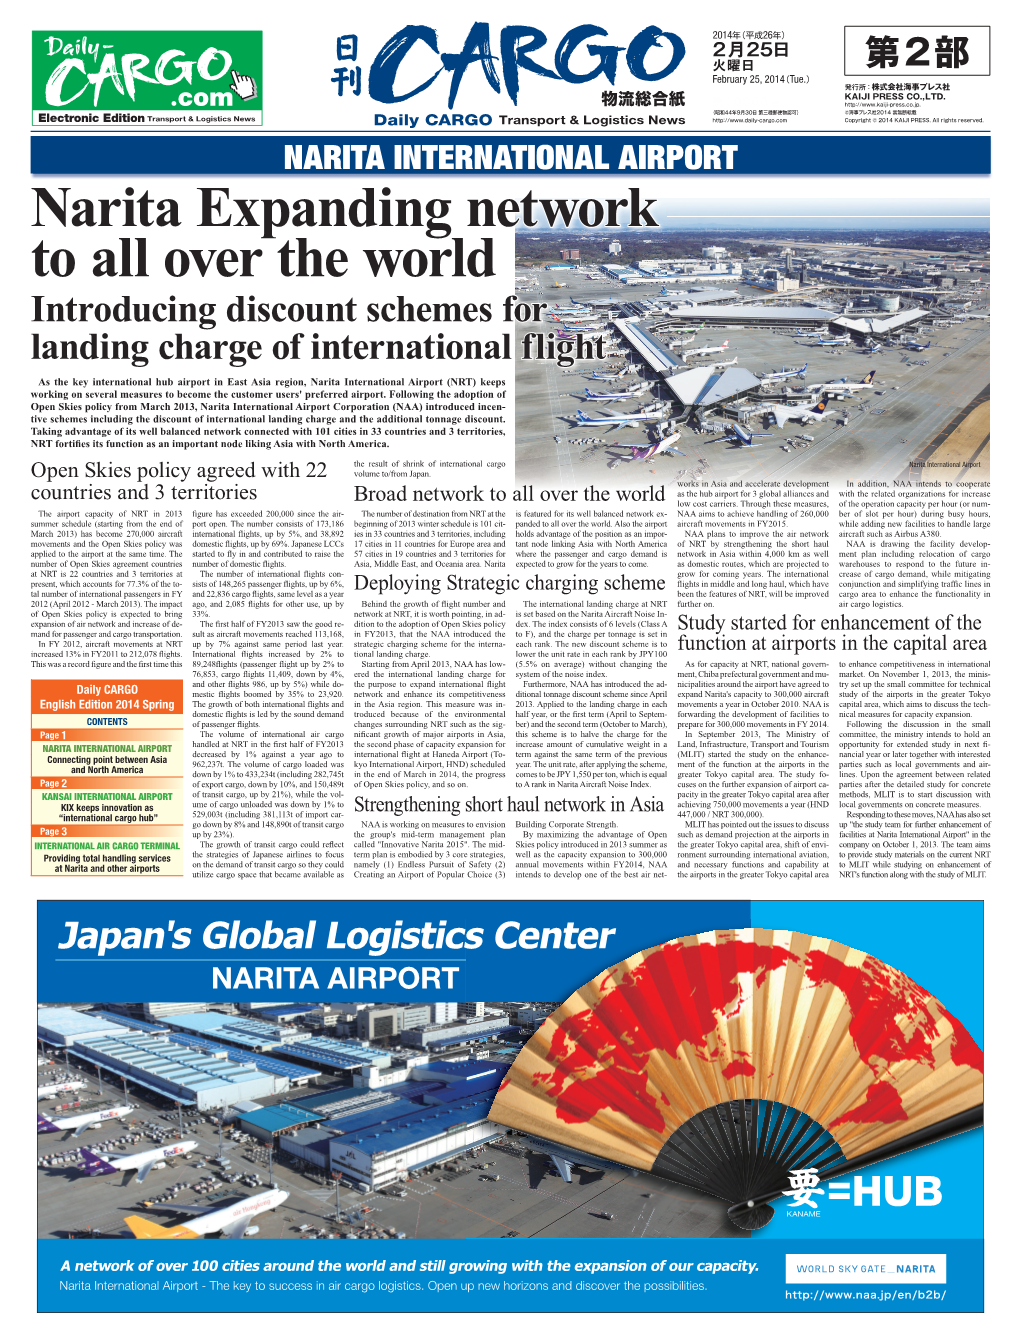 Narita Expanding Network to All Over the World